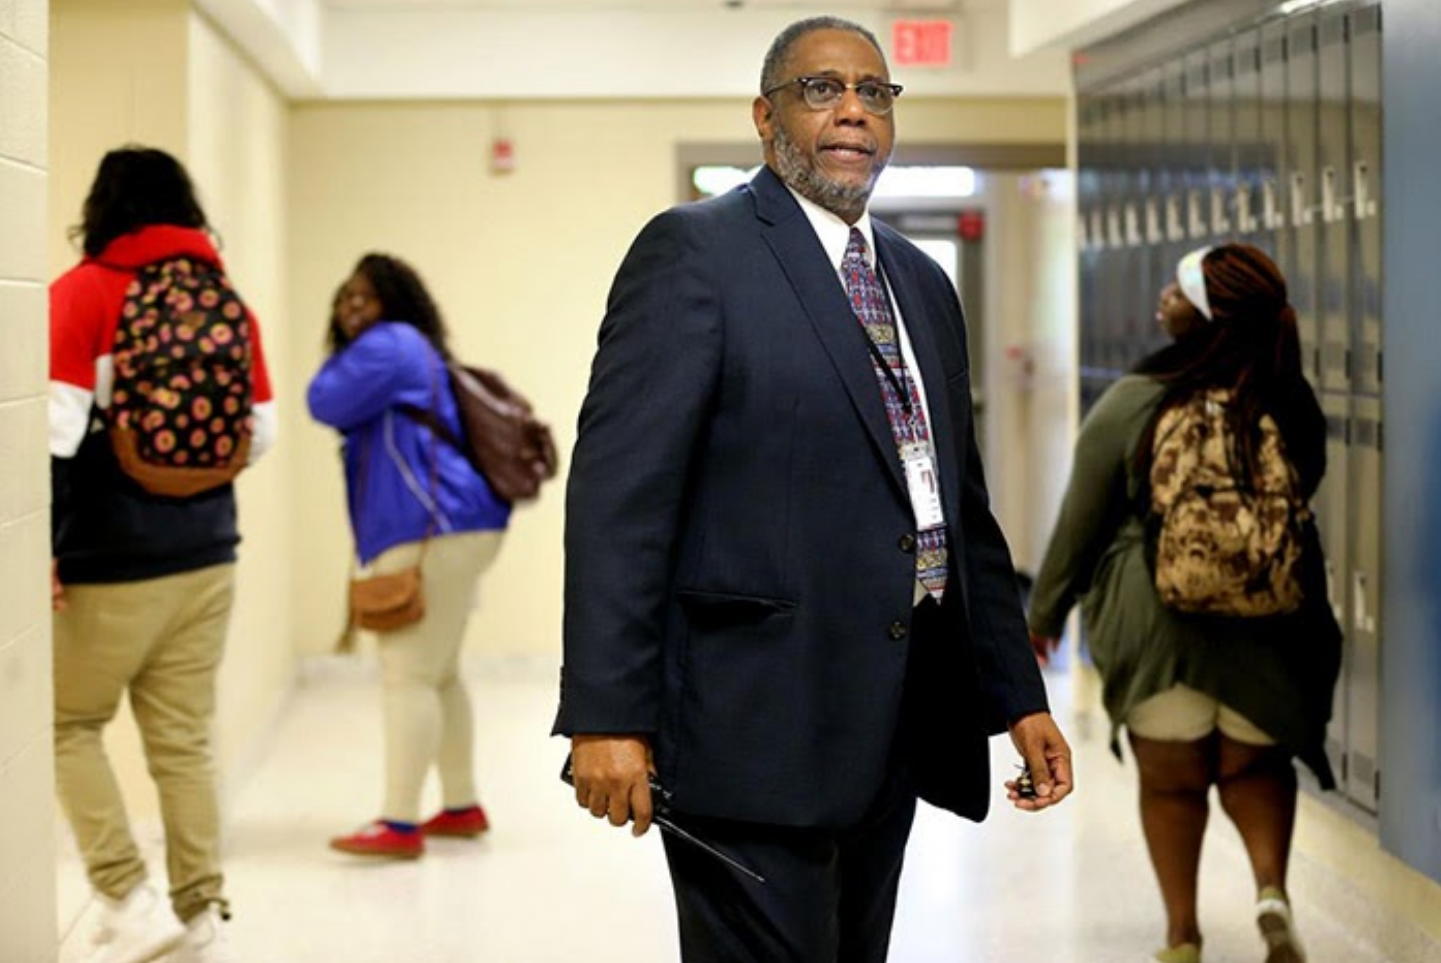 Principal works two jobs to support low-income students